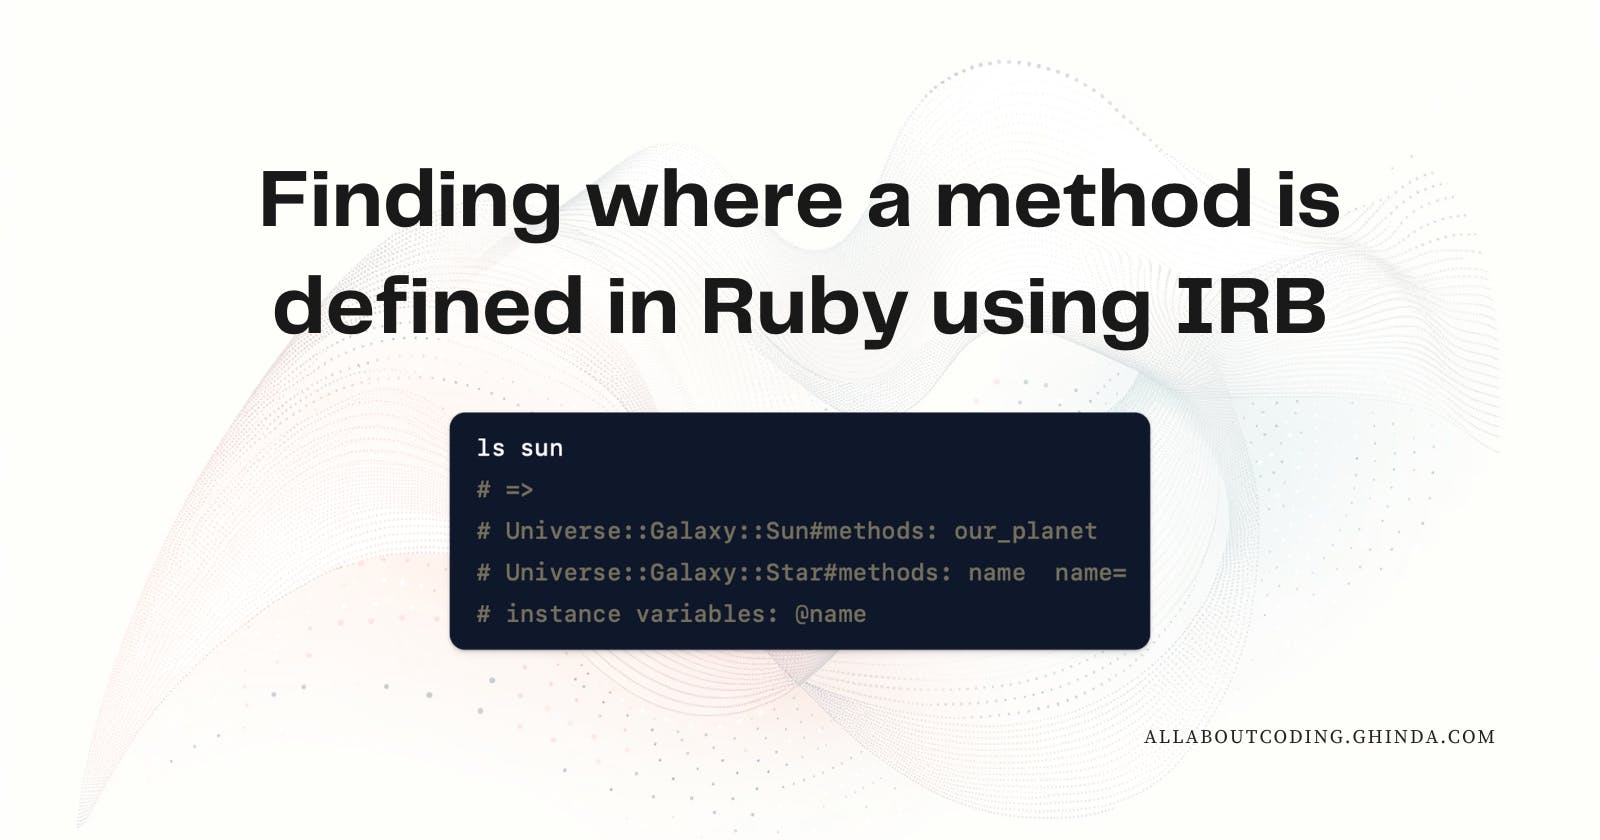 Finding where a method is defined in Ruby using IRB